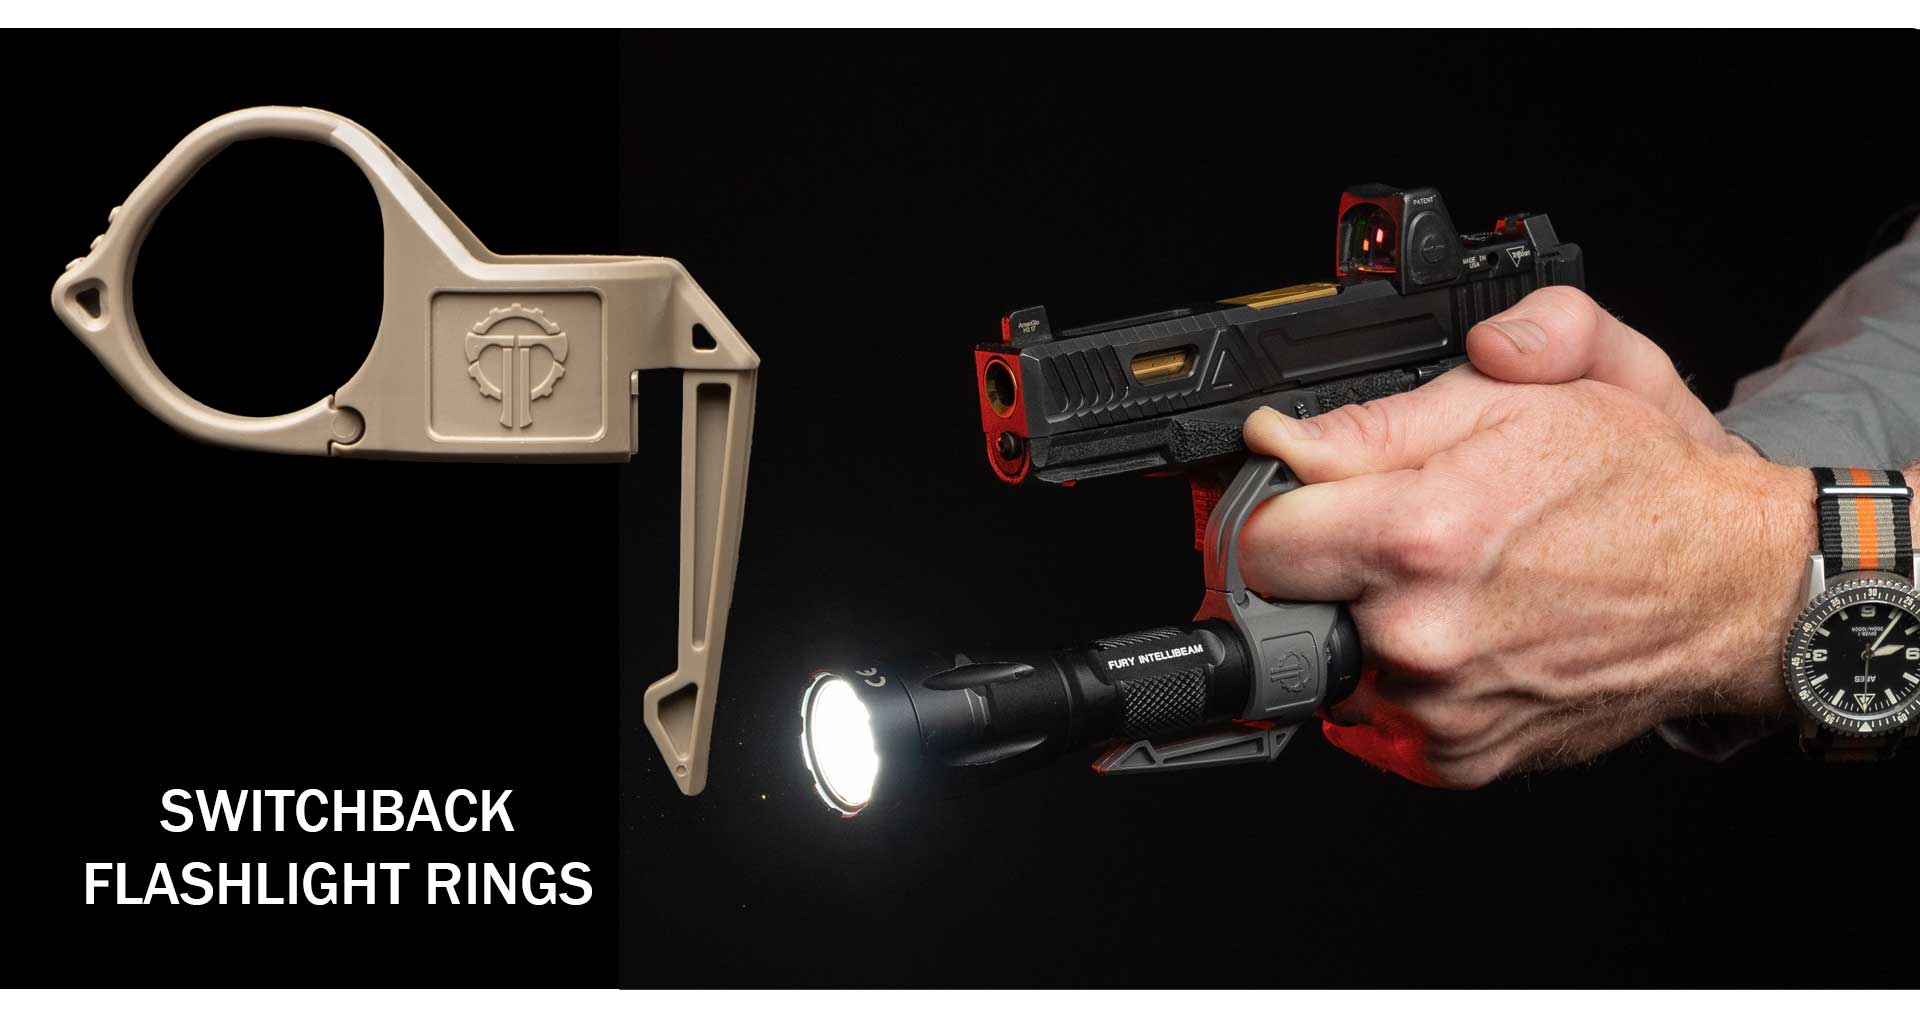 SwitchBack Flashlight Rings in use